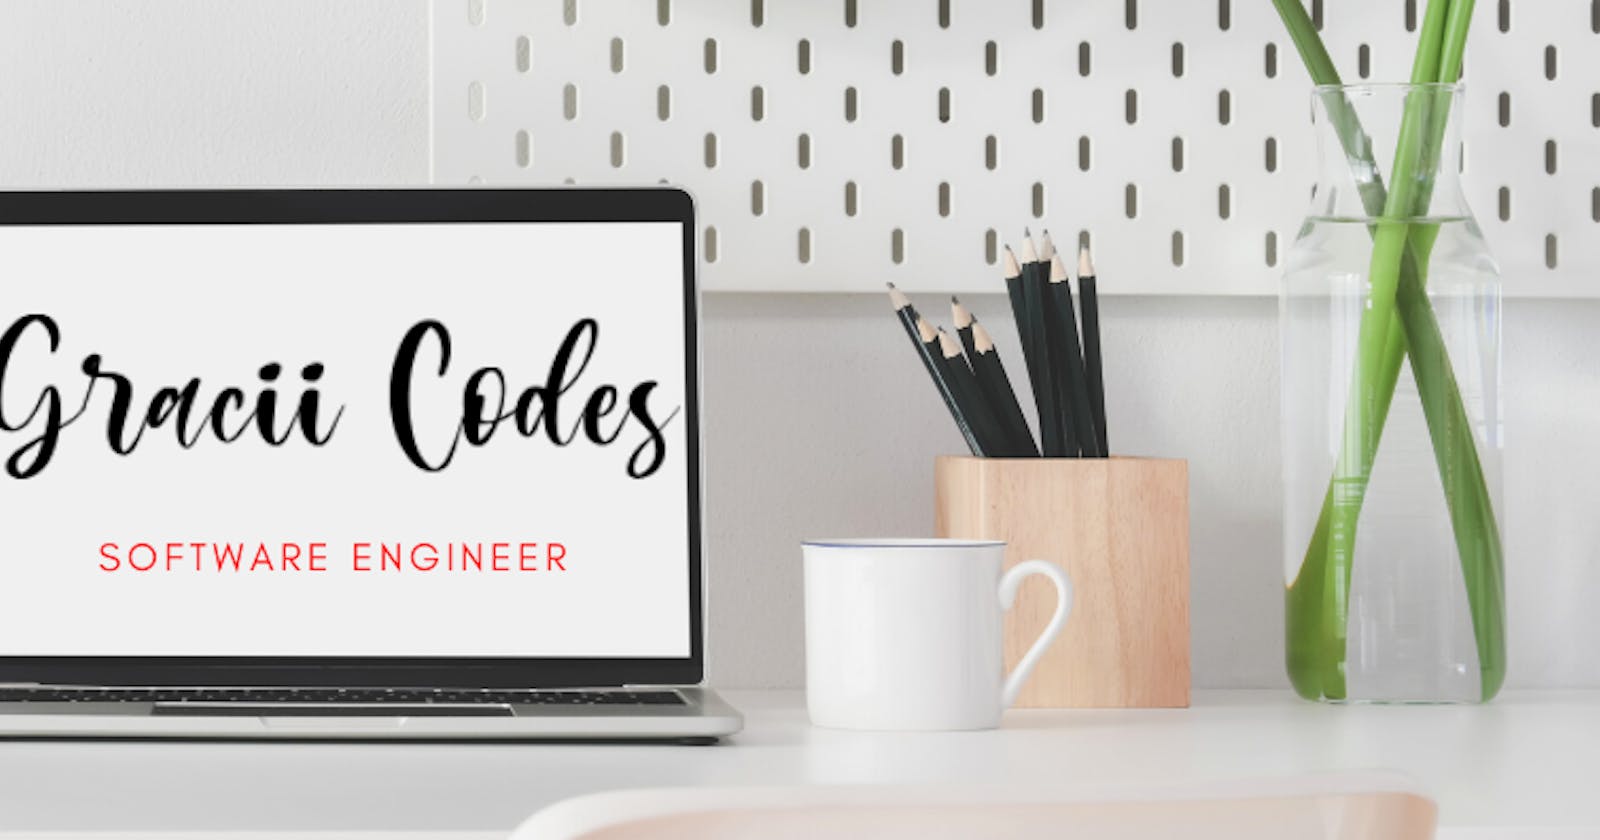 My first blog post! This will be about my coding learning journey at age 48!